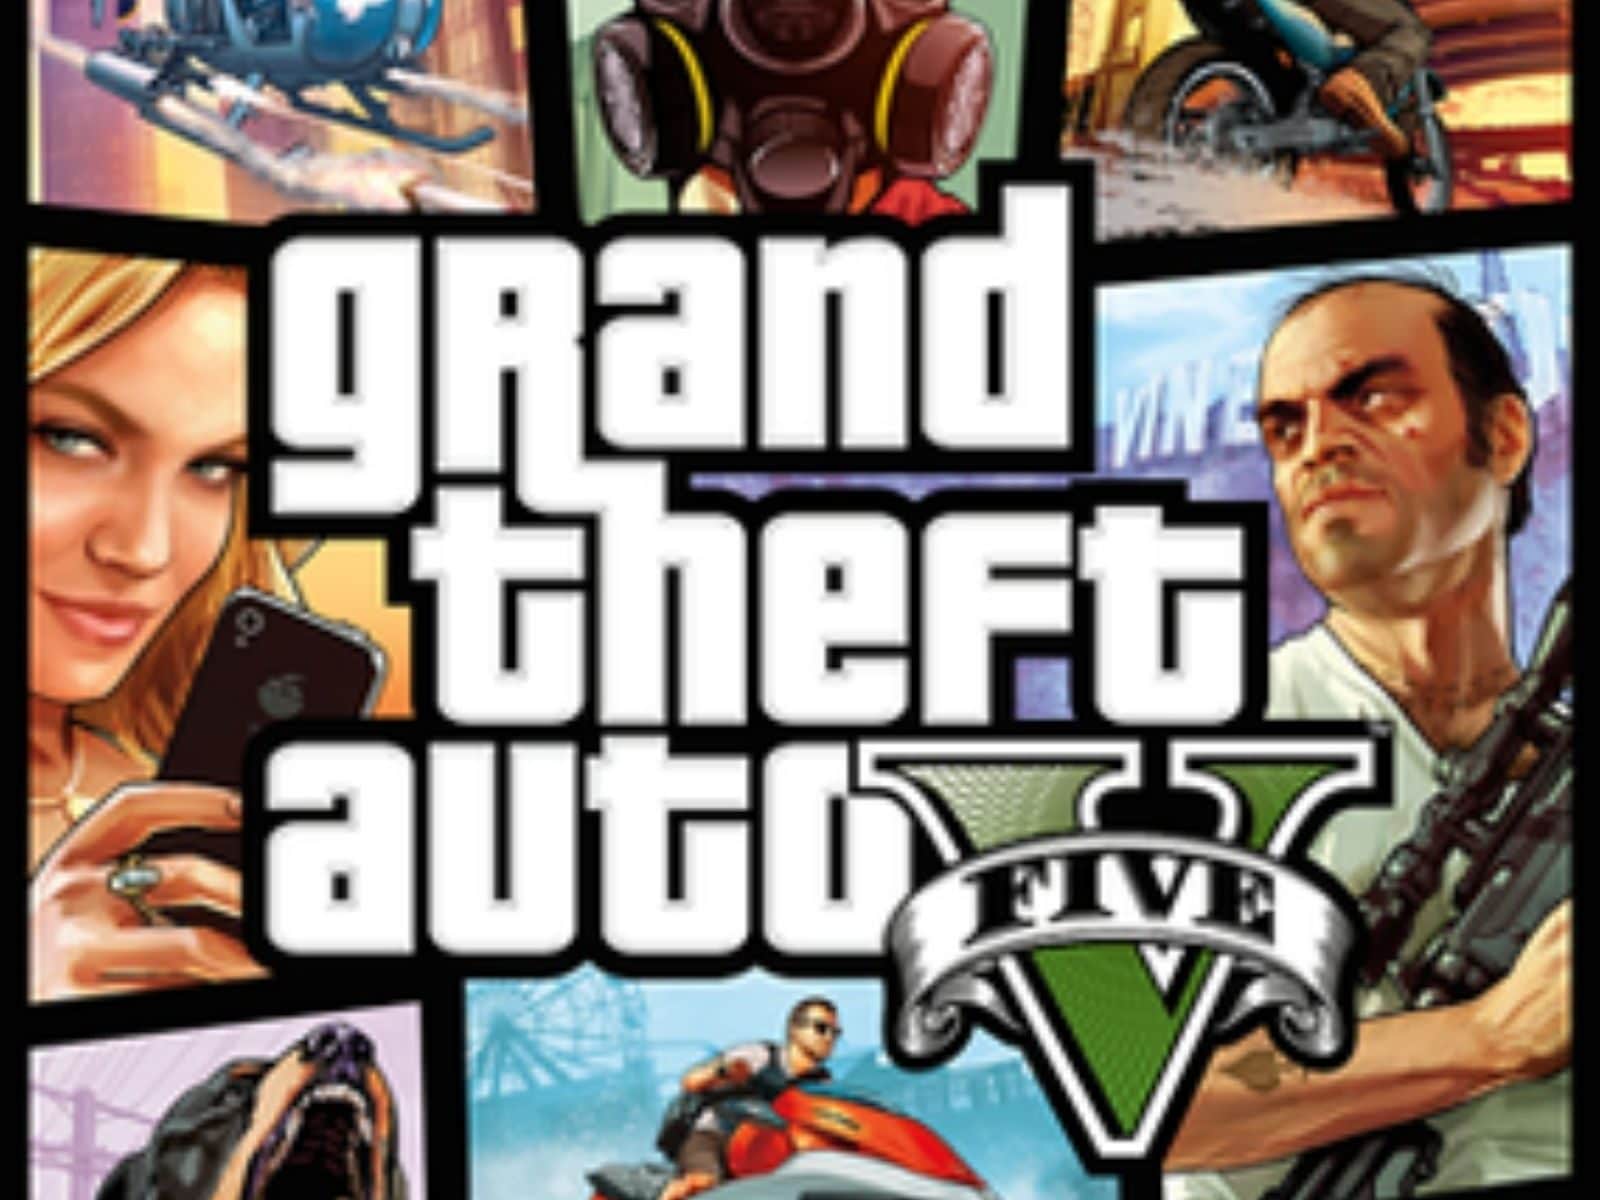 Grand Theft Auto V Is Now Available for PC - Rockstar Games